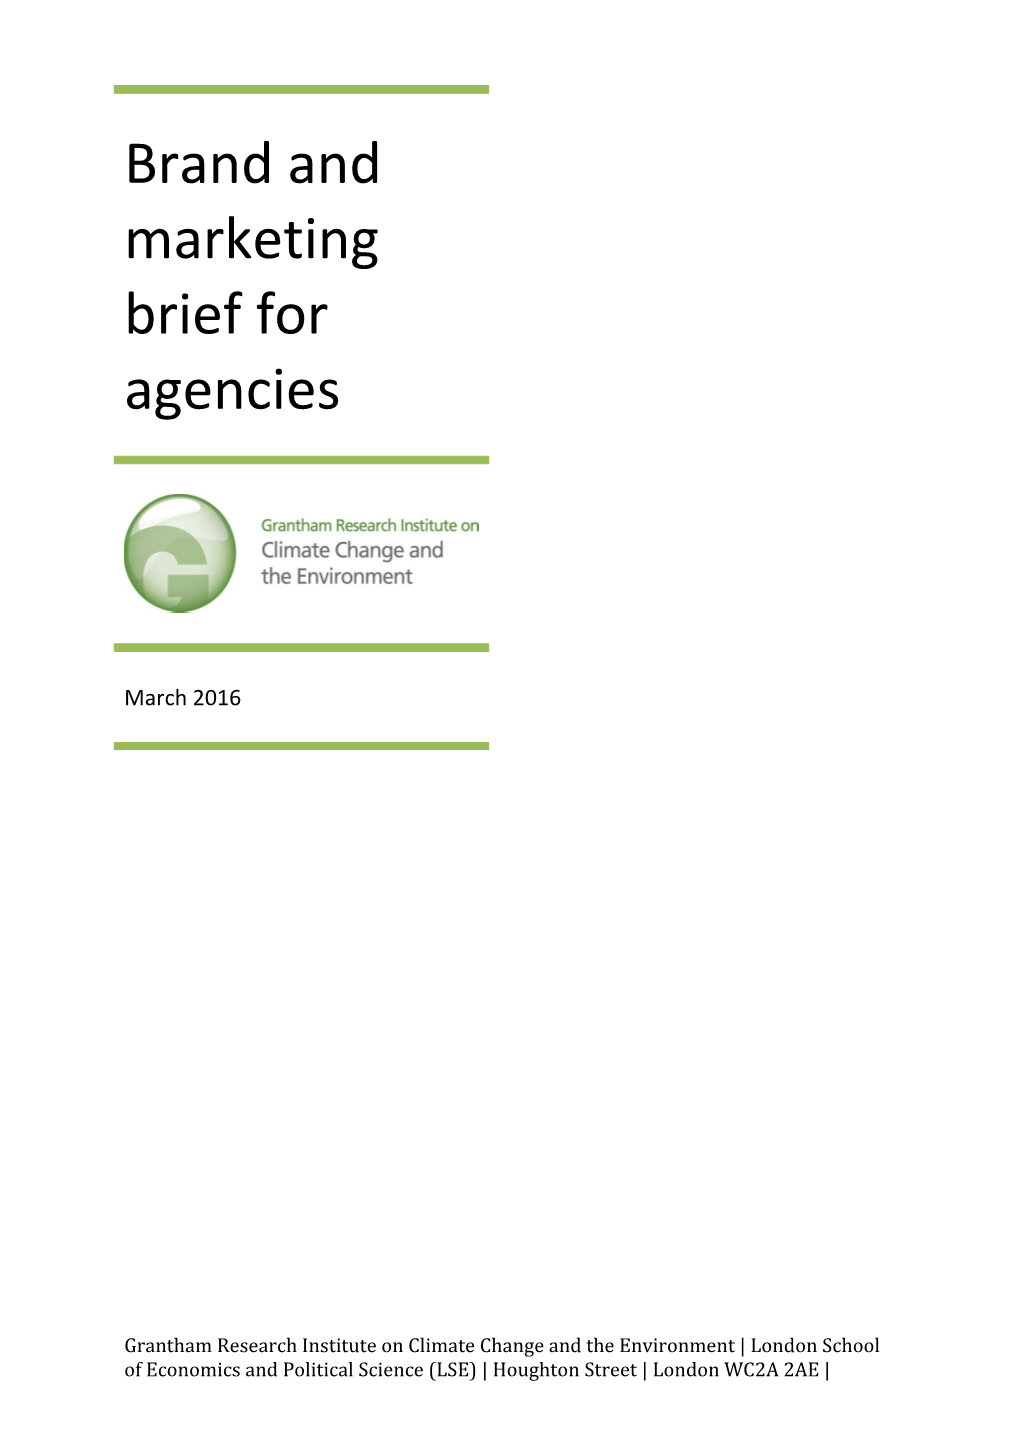 Brand and Marketing Brief for Agencies